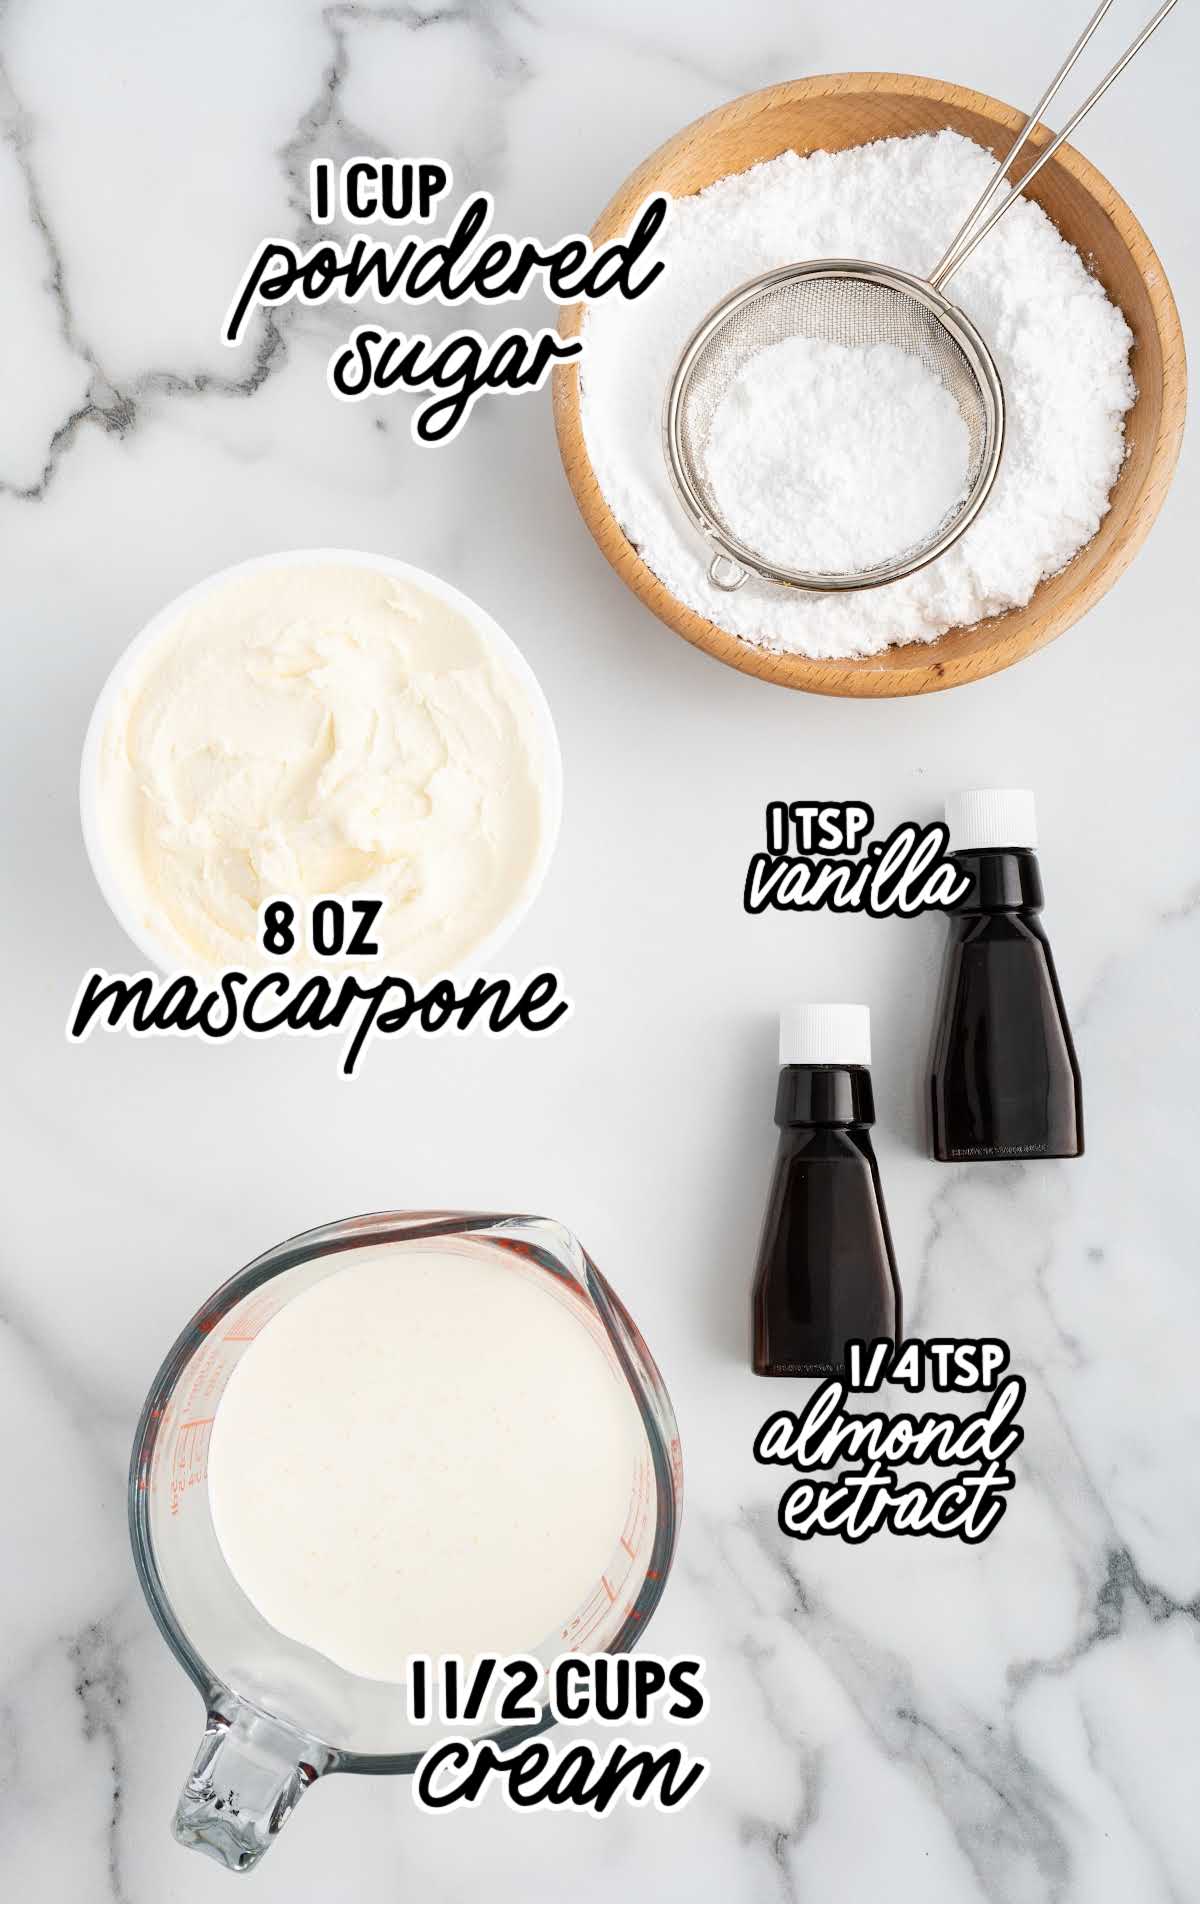 Mascarpone Frosting raw ingredients that are labeled